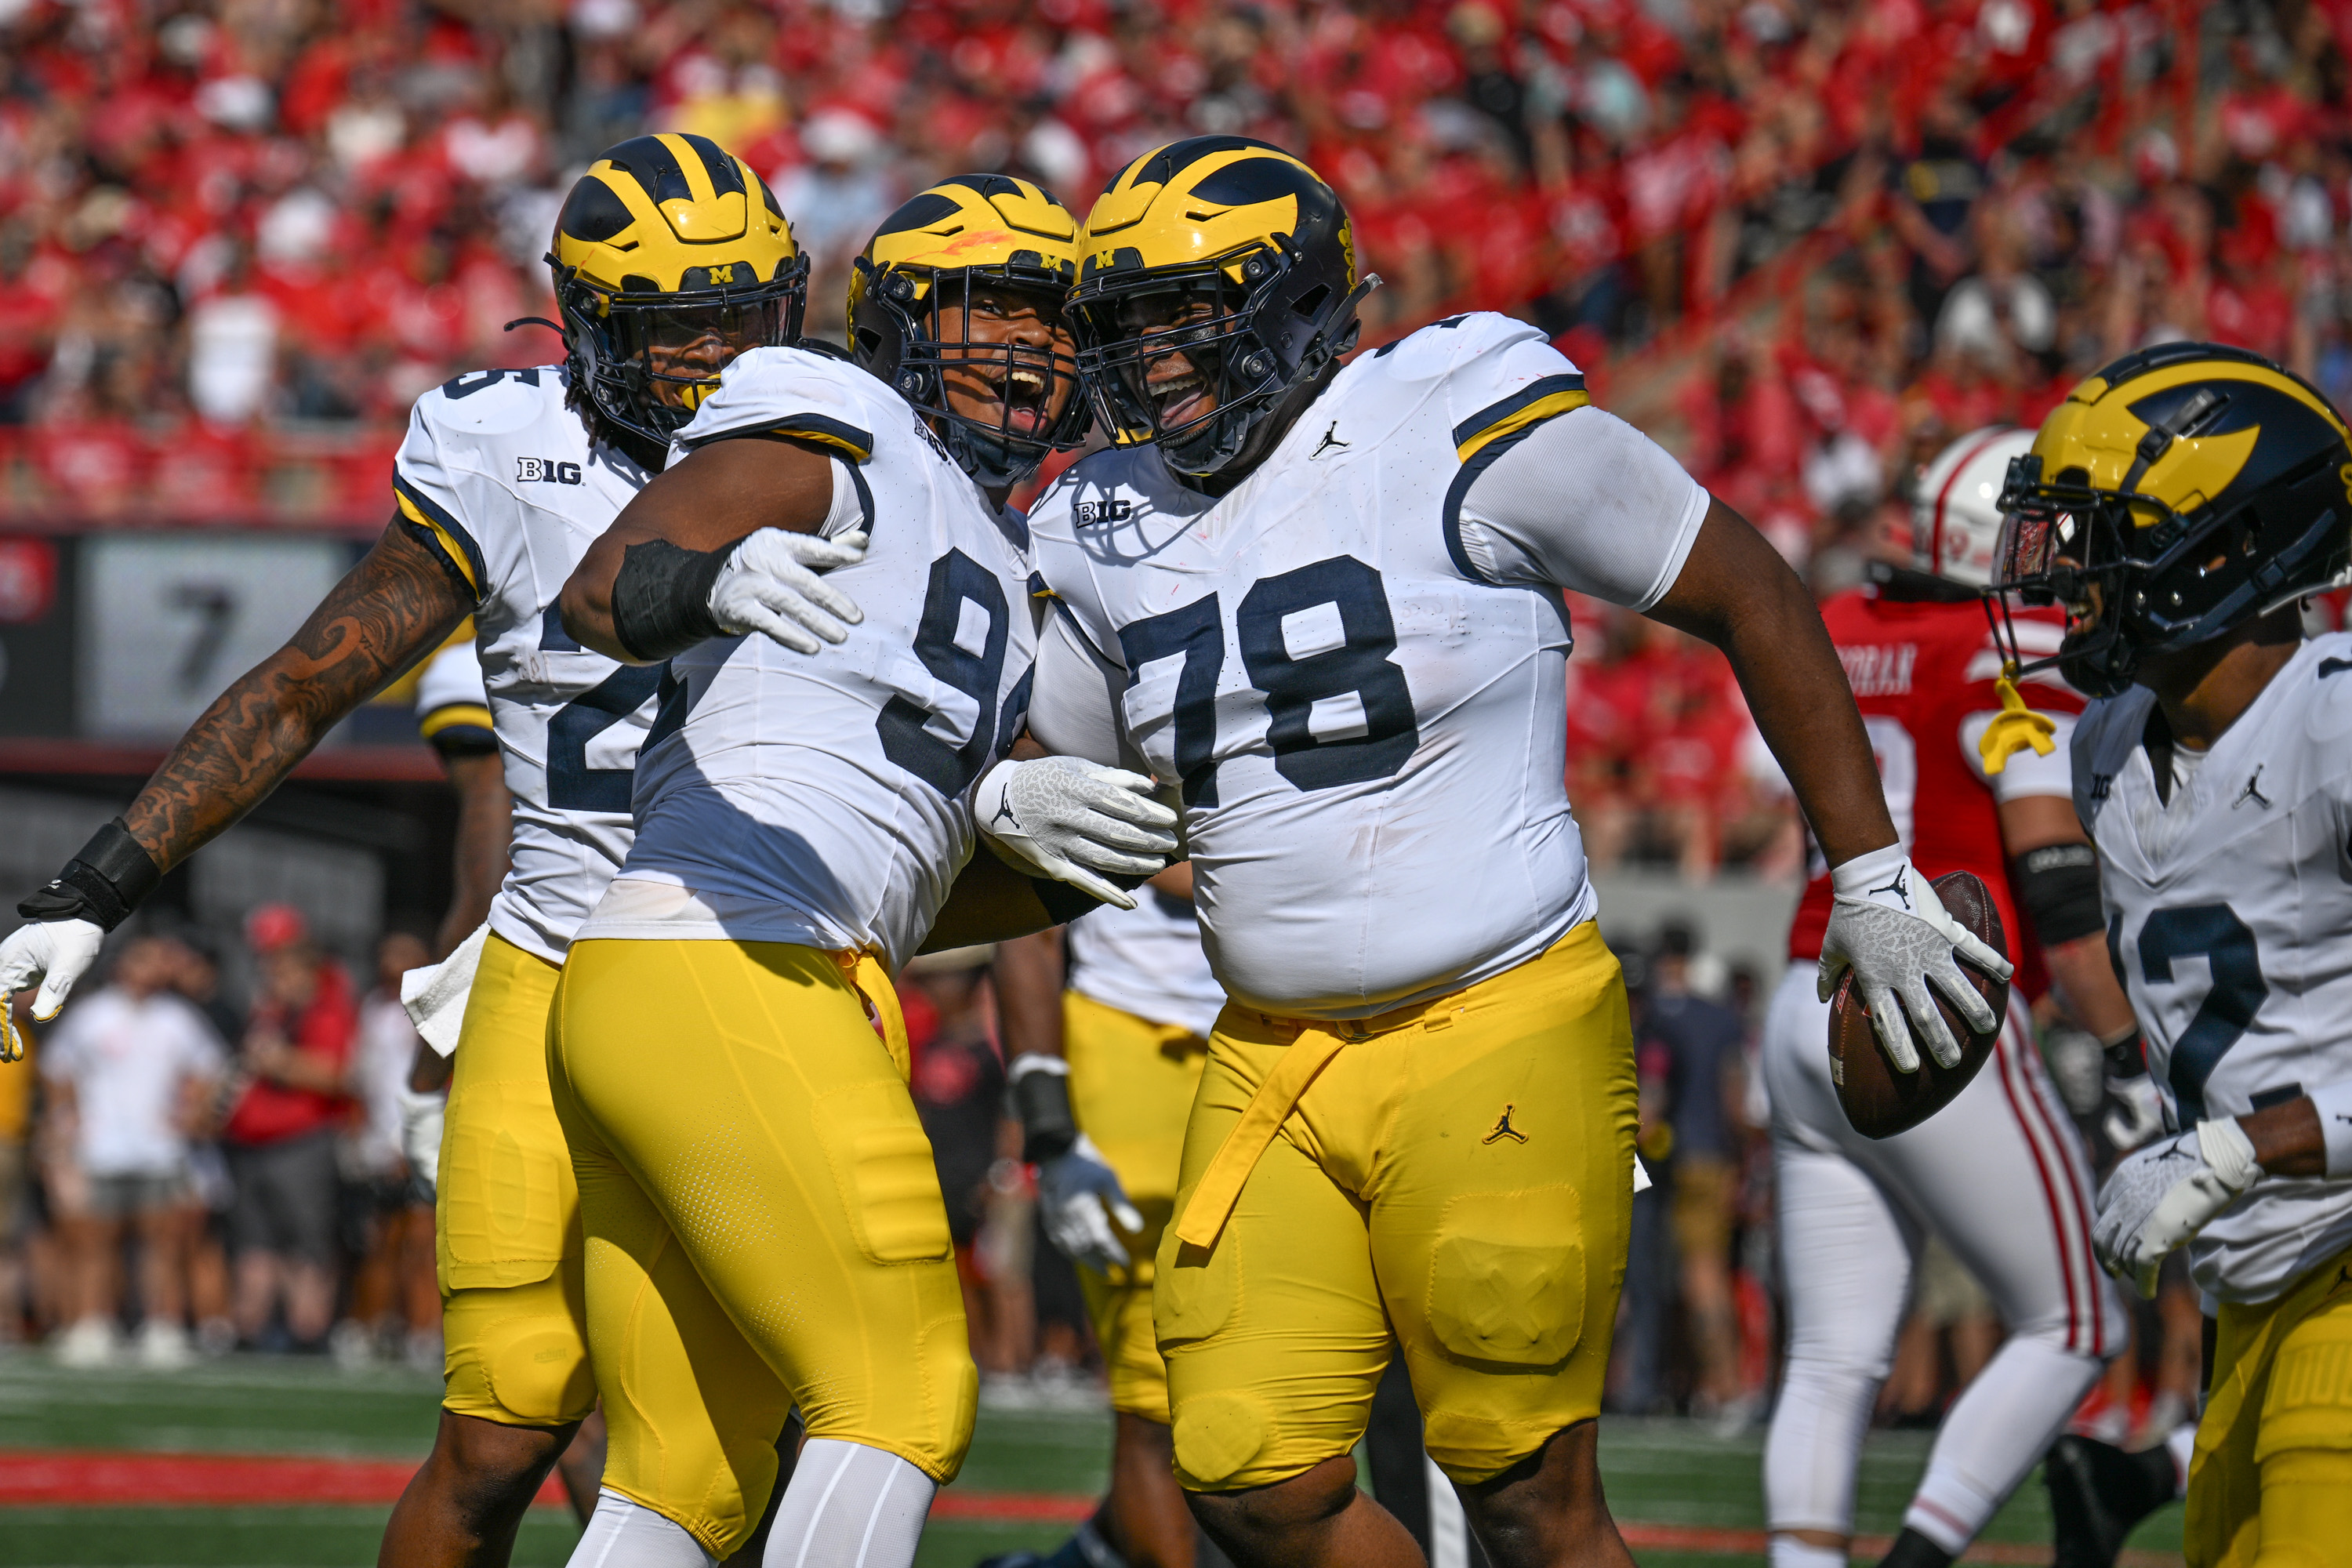 Michigan football finally flashes championship potential in win at